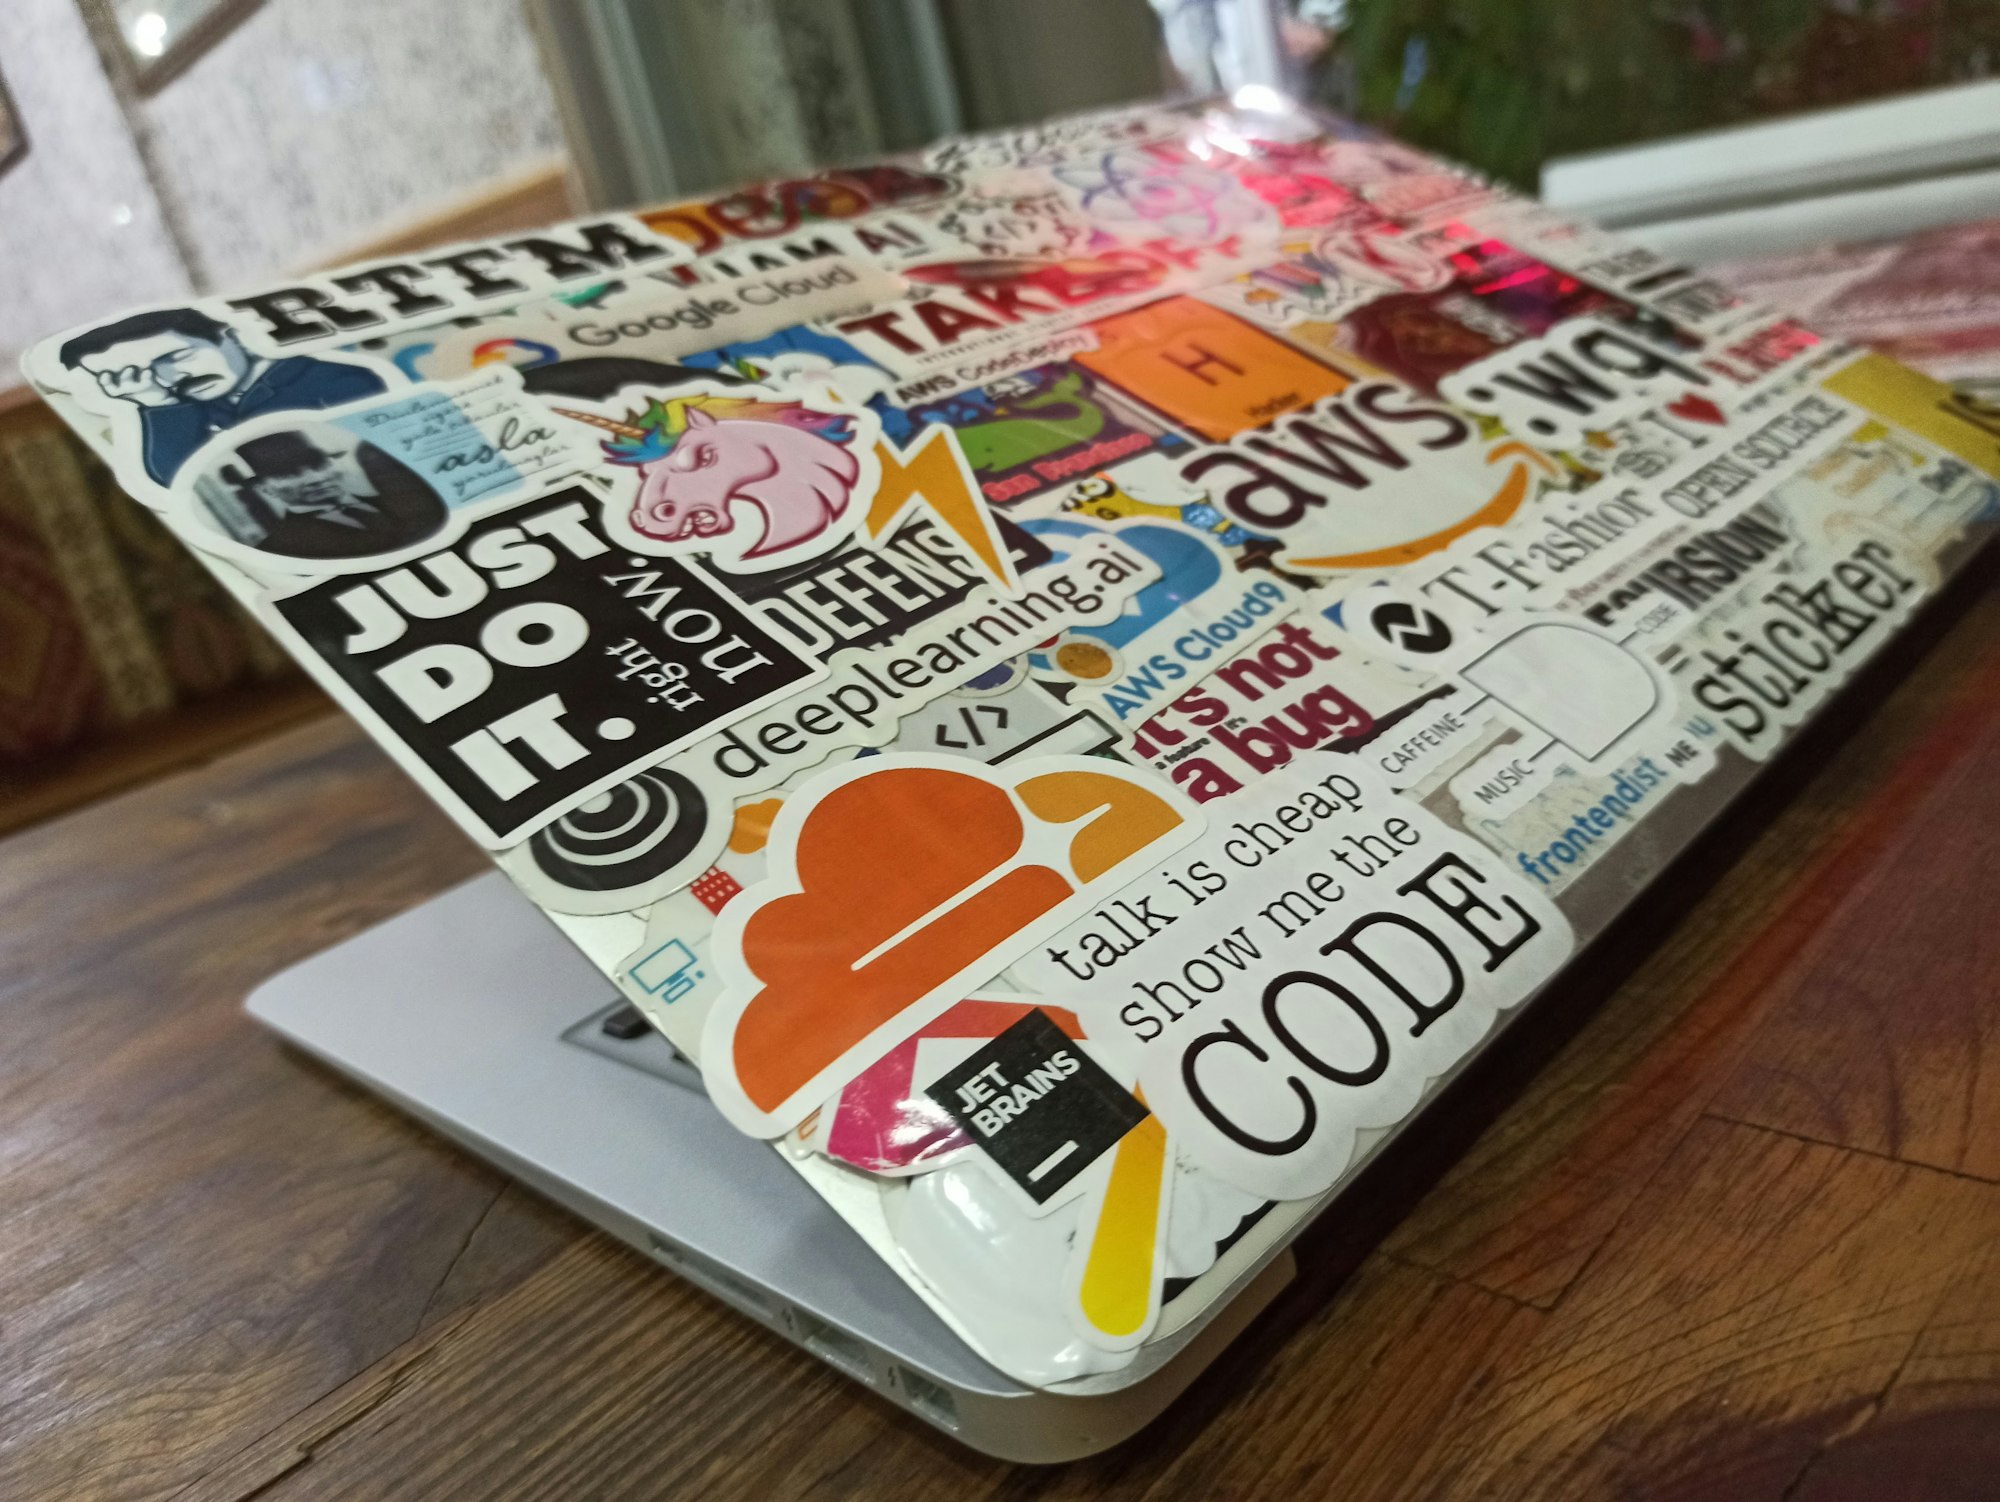 a MacBook Air with a lot of stickers about programming on the back.

talk is cheap show me the code
just do it right now
open source
:wq
aws
jetbrains
cloudflare
rtfm 
unicorn
t-fashion
